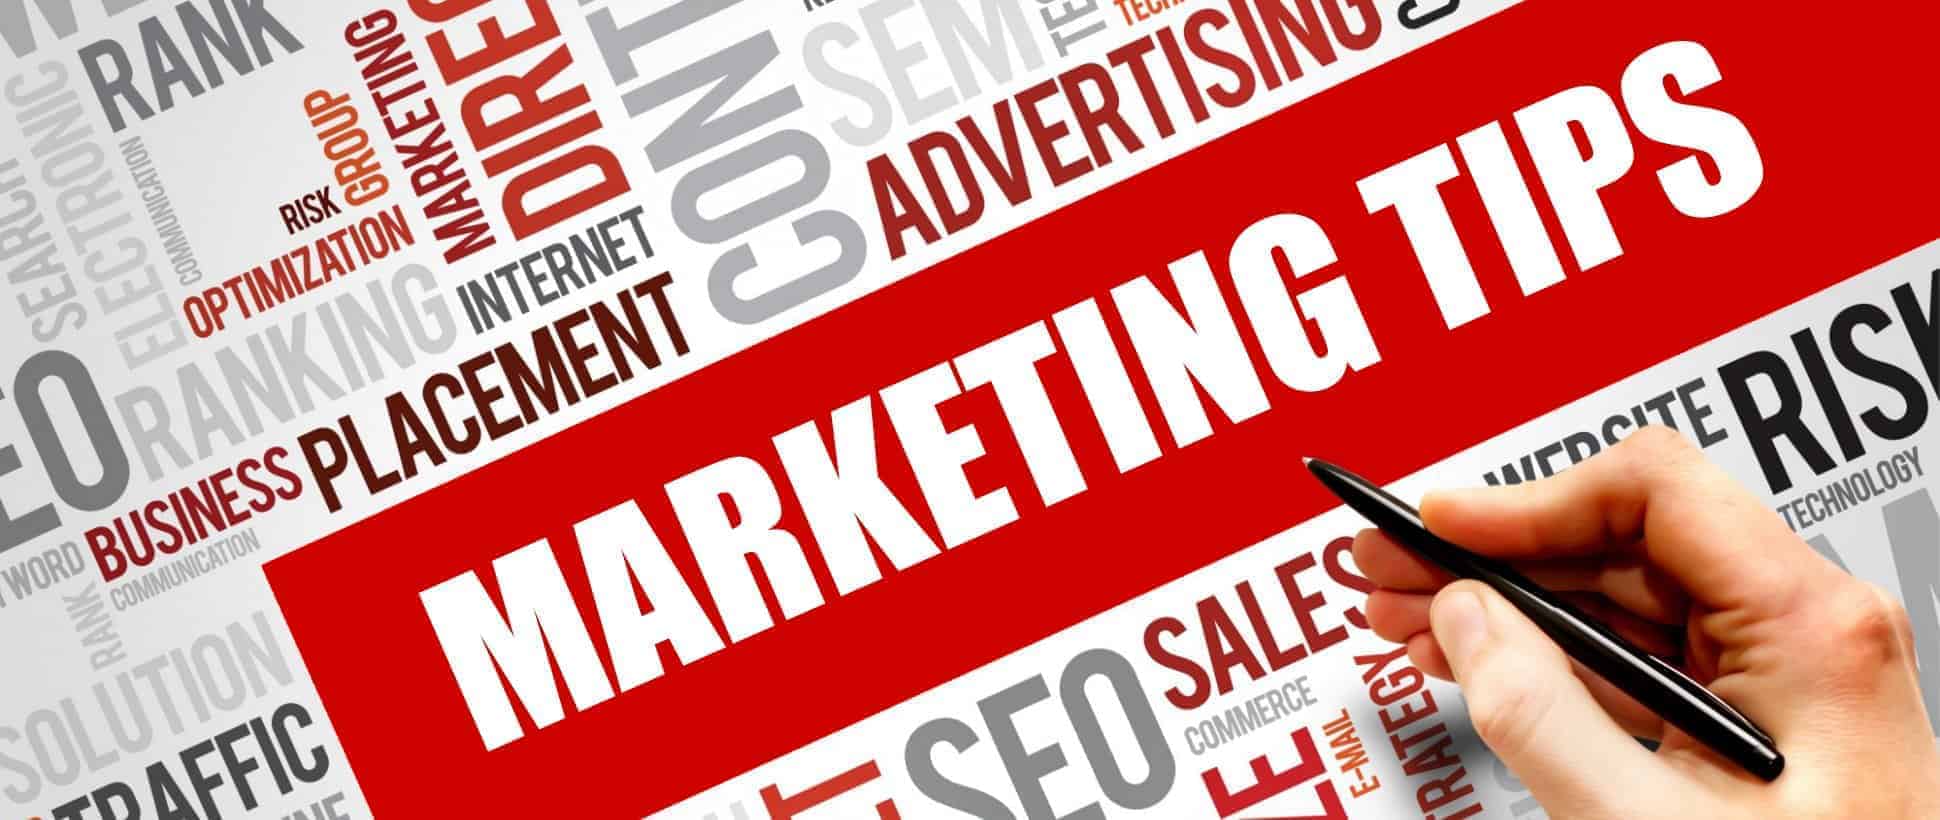 Online Marketing Tips for Small Businesses in the Service Industries